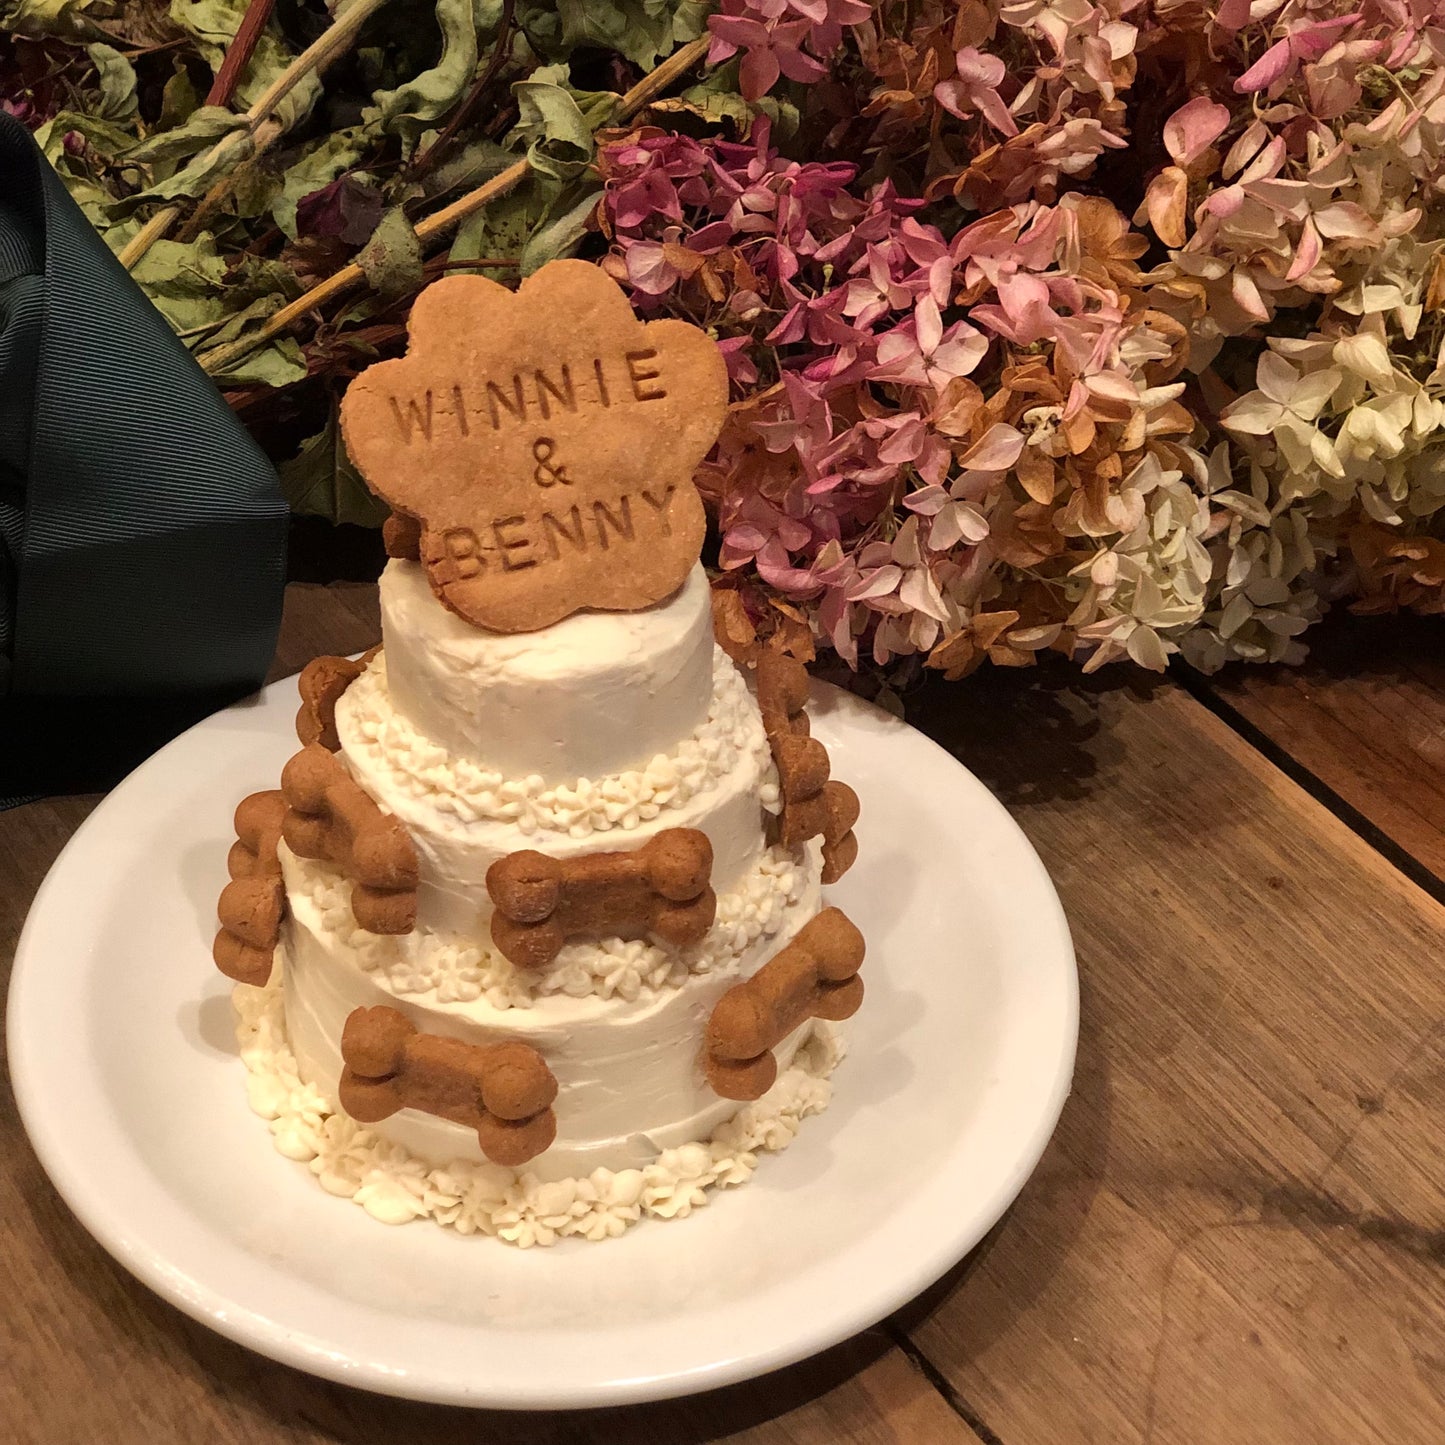 An all-white three-tier cake with white flowers and dog bone decorations. A cookie in the shape of a paw print sits atop the cake and reads, "Winnie & Benny."